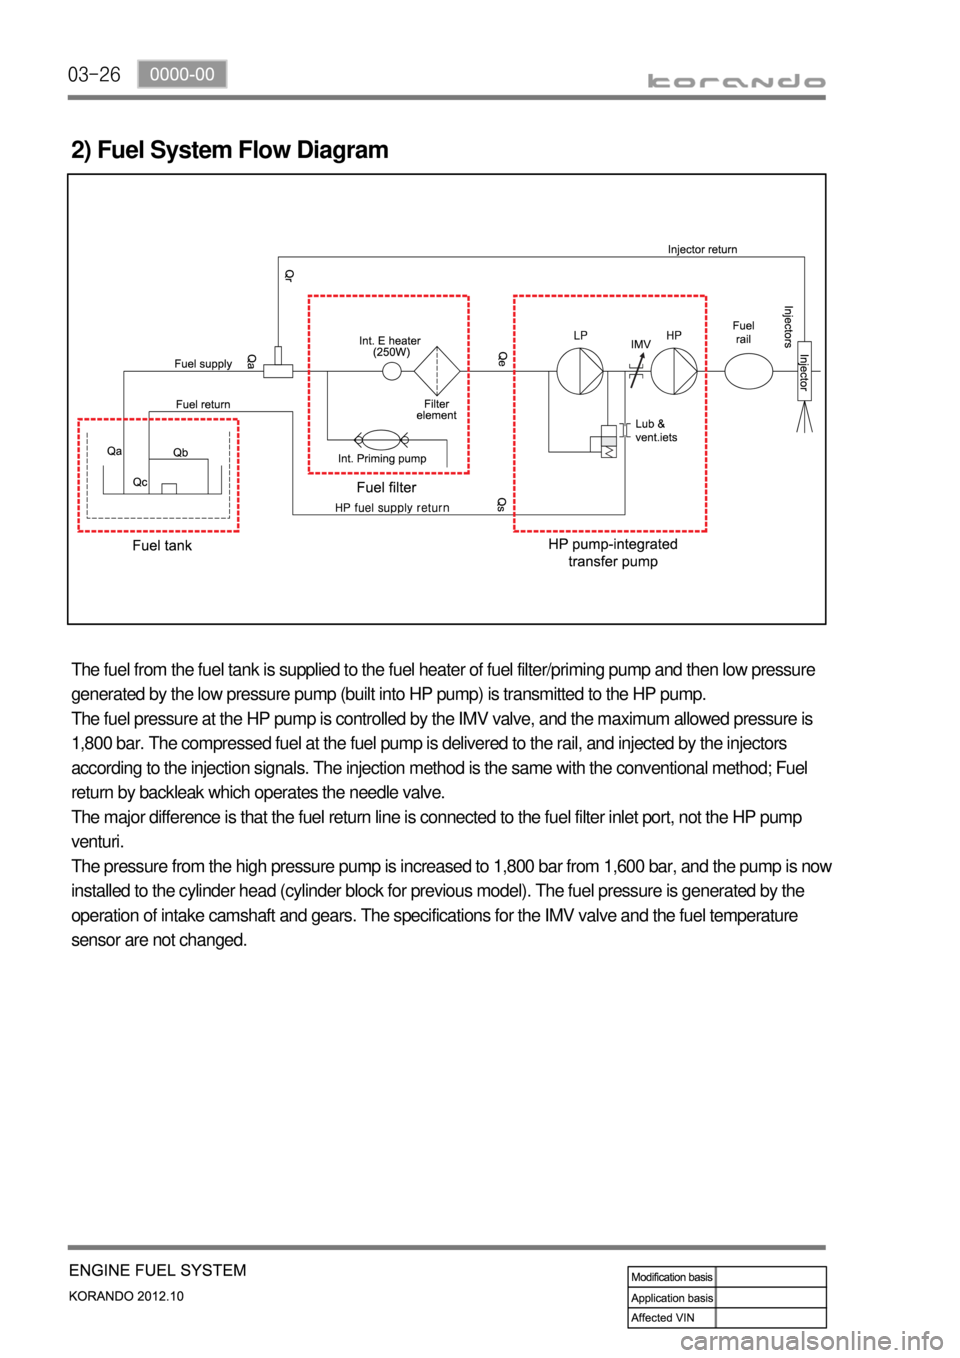 SSANGYONG KORANDO 2012  Service Manual 03-26
2) Fuel System Flow Diagram
The fuel from the fuel tank is supplied to the fuel heater of fuel filter/priming pump and then low pressure 
generated by the low pressure pump (built into HP pump) 